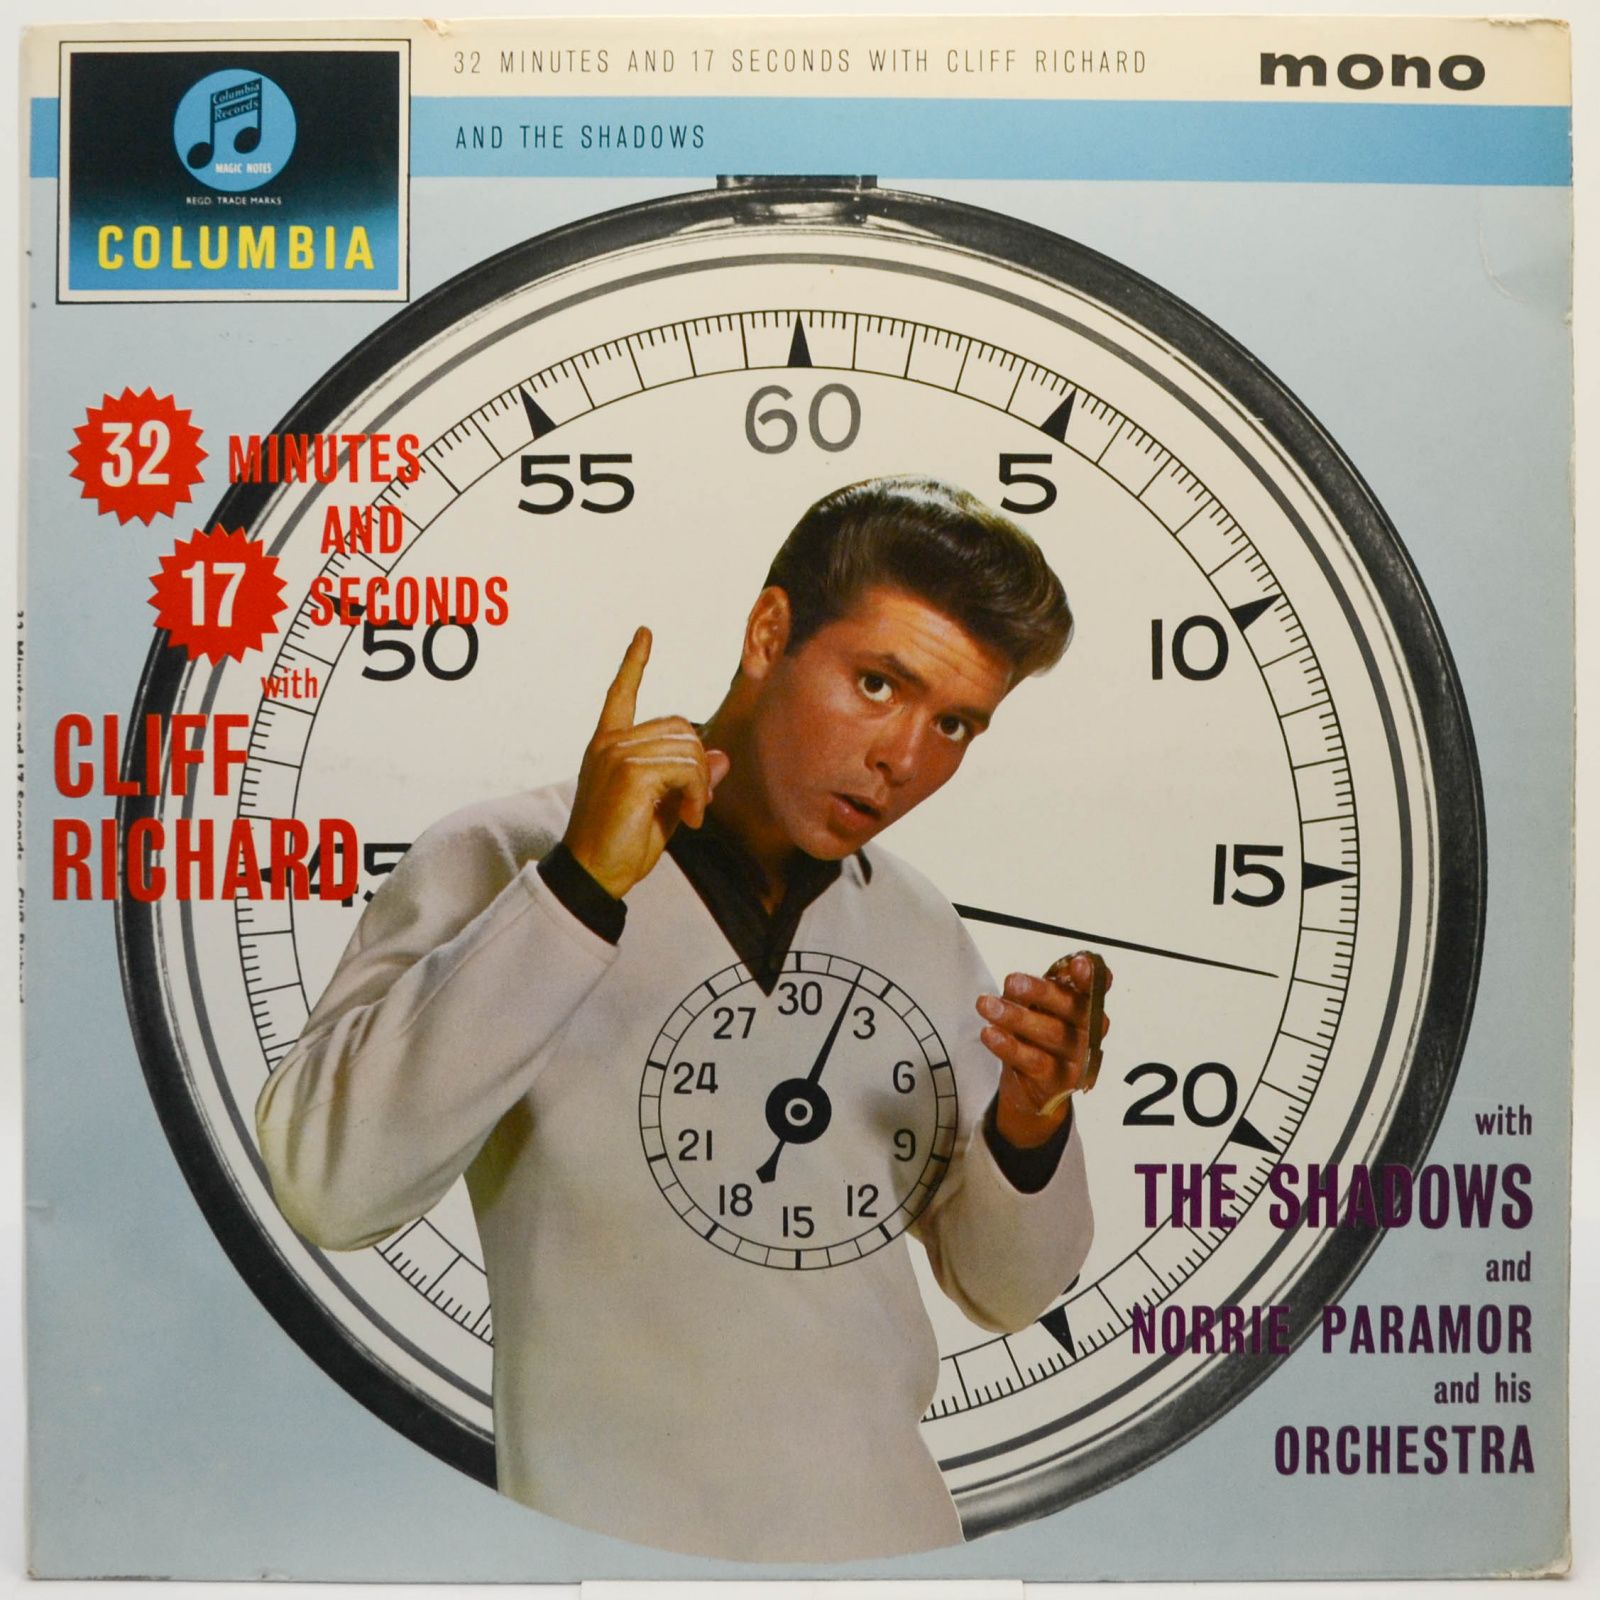 Cliff Richard With The Shadows — And Norrie Paramor And His Orchestra ‎– 32 Minutes And 17 Seconds With Cliff Richard, 1962